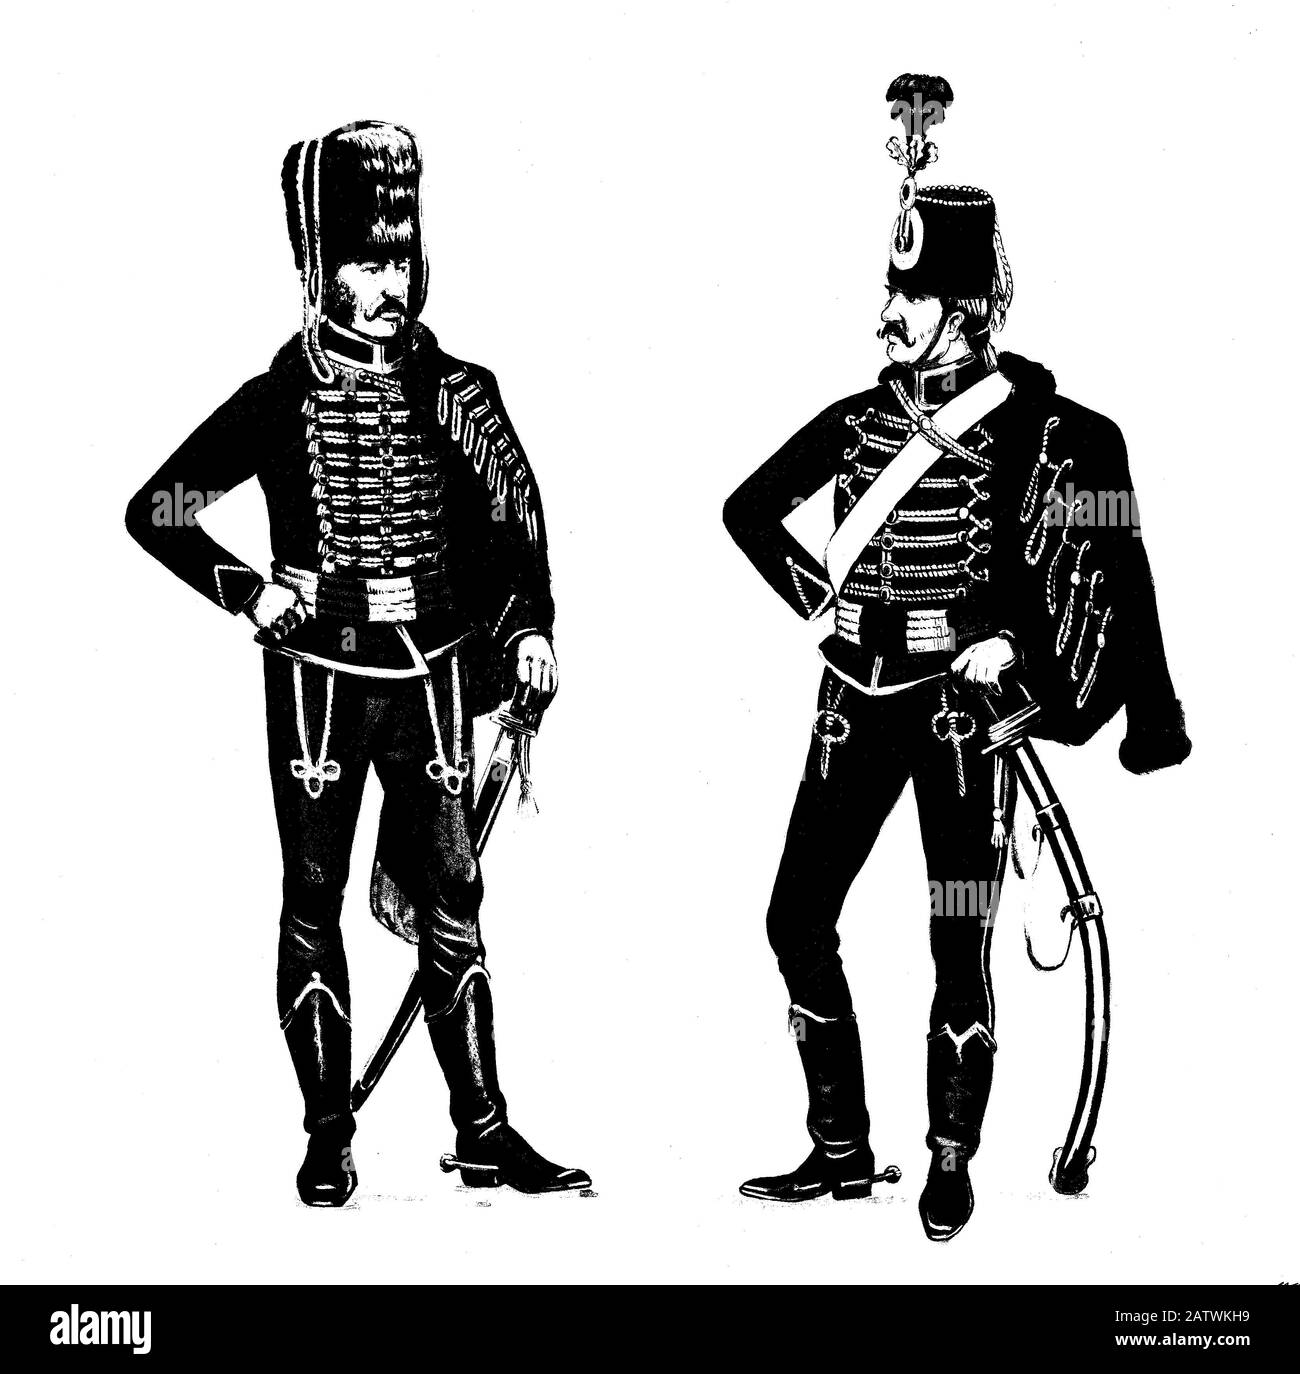 German hussars illustration. Hussar uniform. Soldiers with sabers. Stock Photo